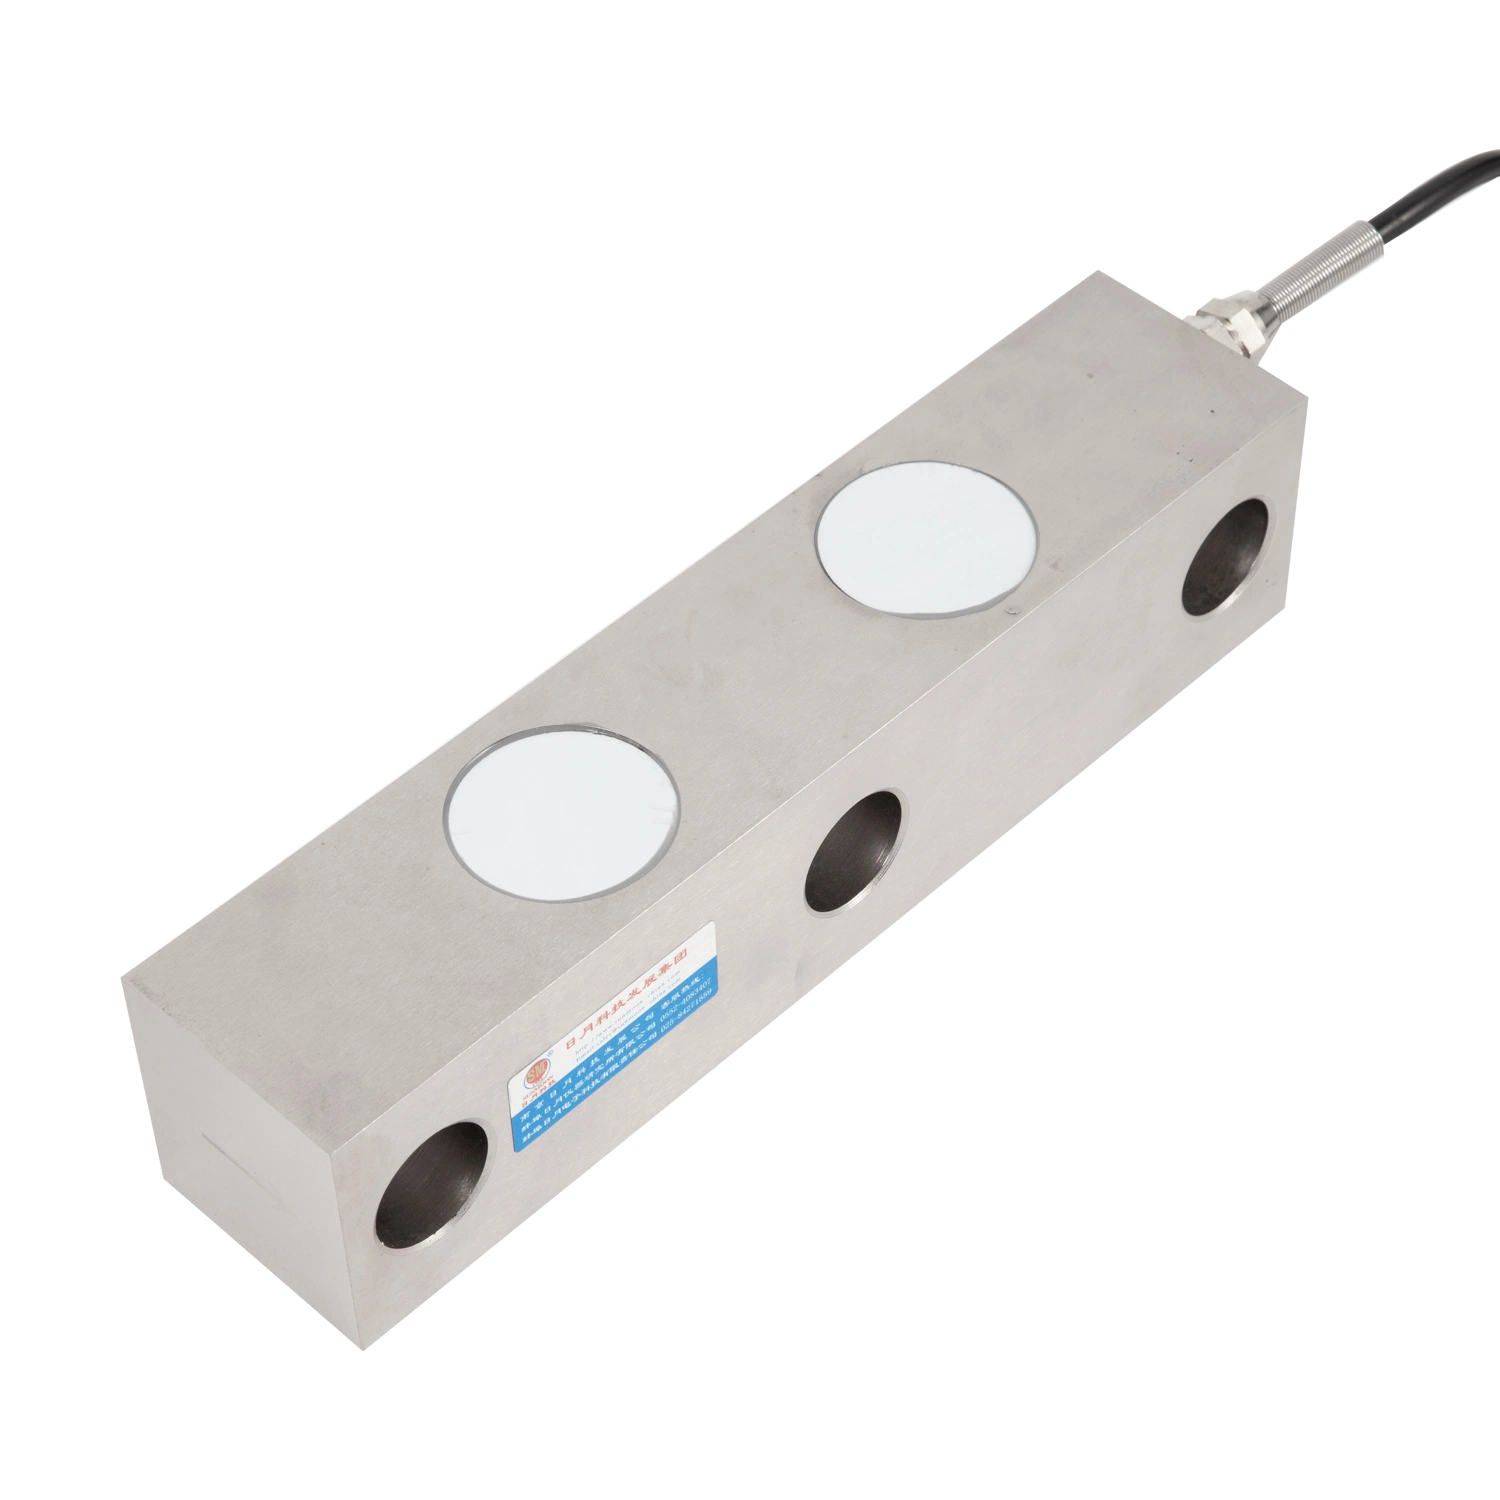 Load Cell Sensor Manufacturhigh Precision Tension and Compression Type Load Cell